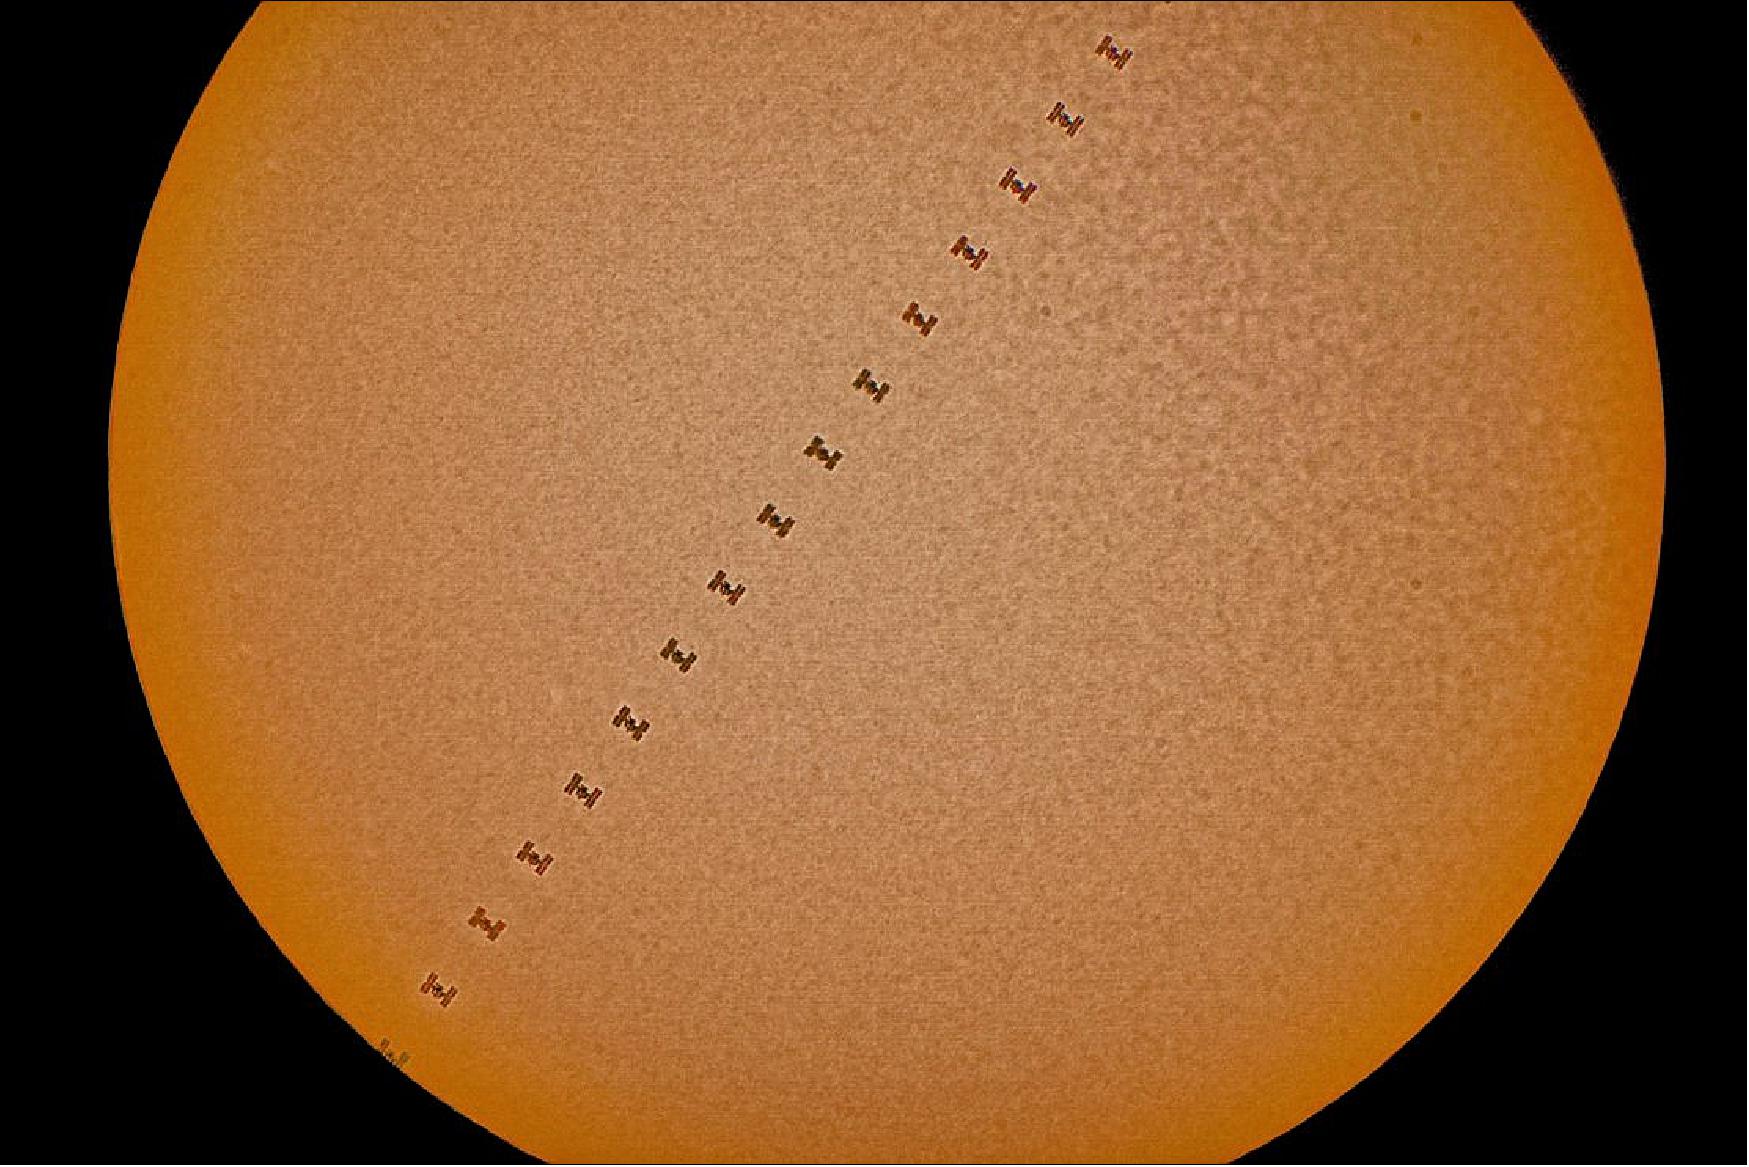 Figure 108: The International Space Station captured transiting the Sun – a remarkable reminder that our Sun's moodswings affect people and technology in space (image credit: Ian Griffin)